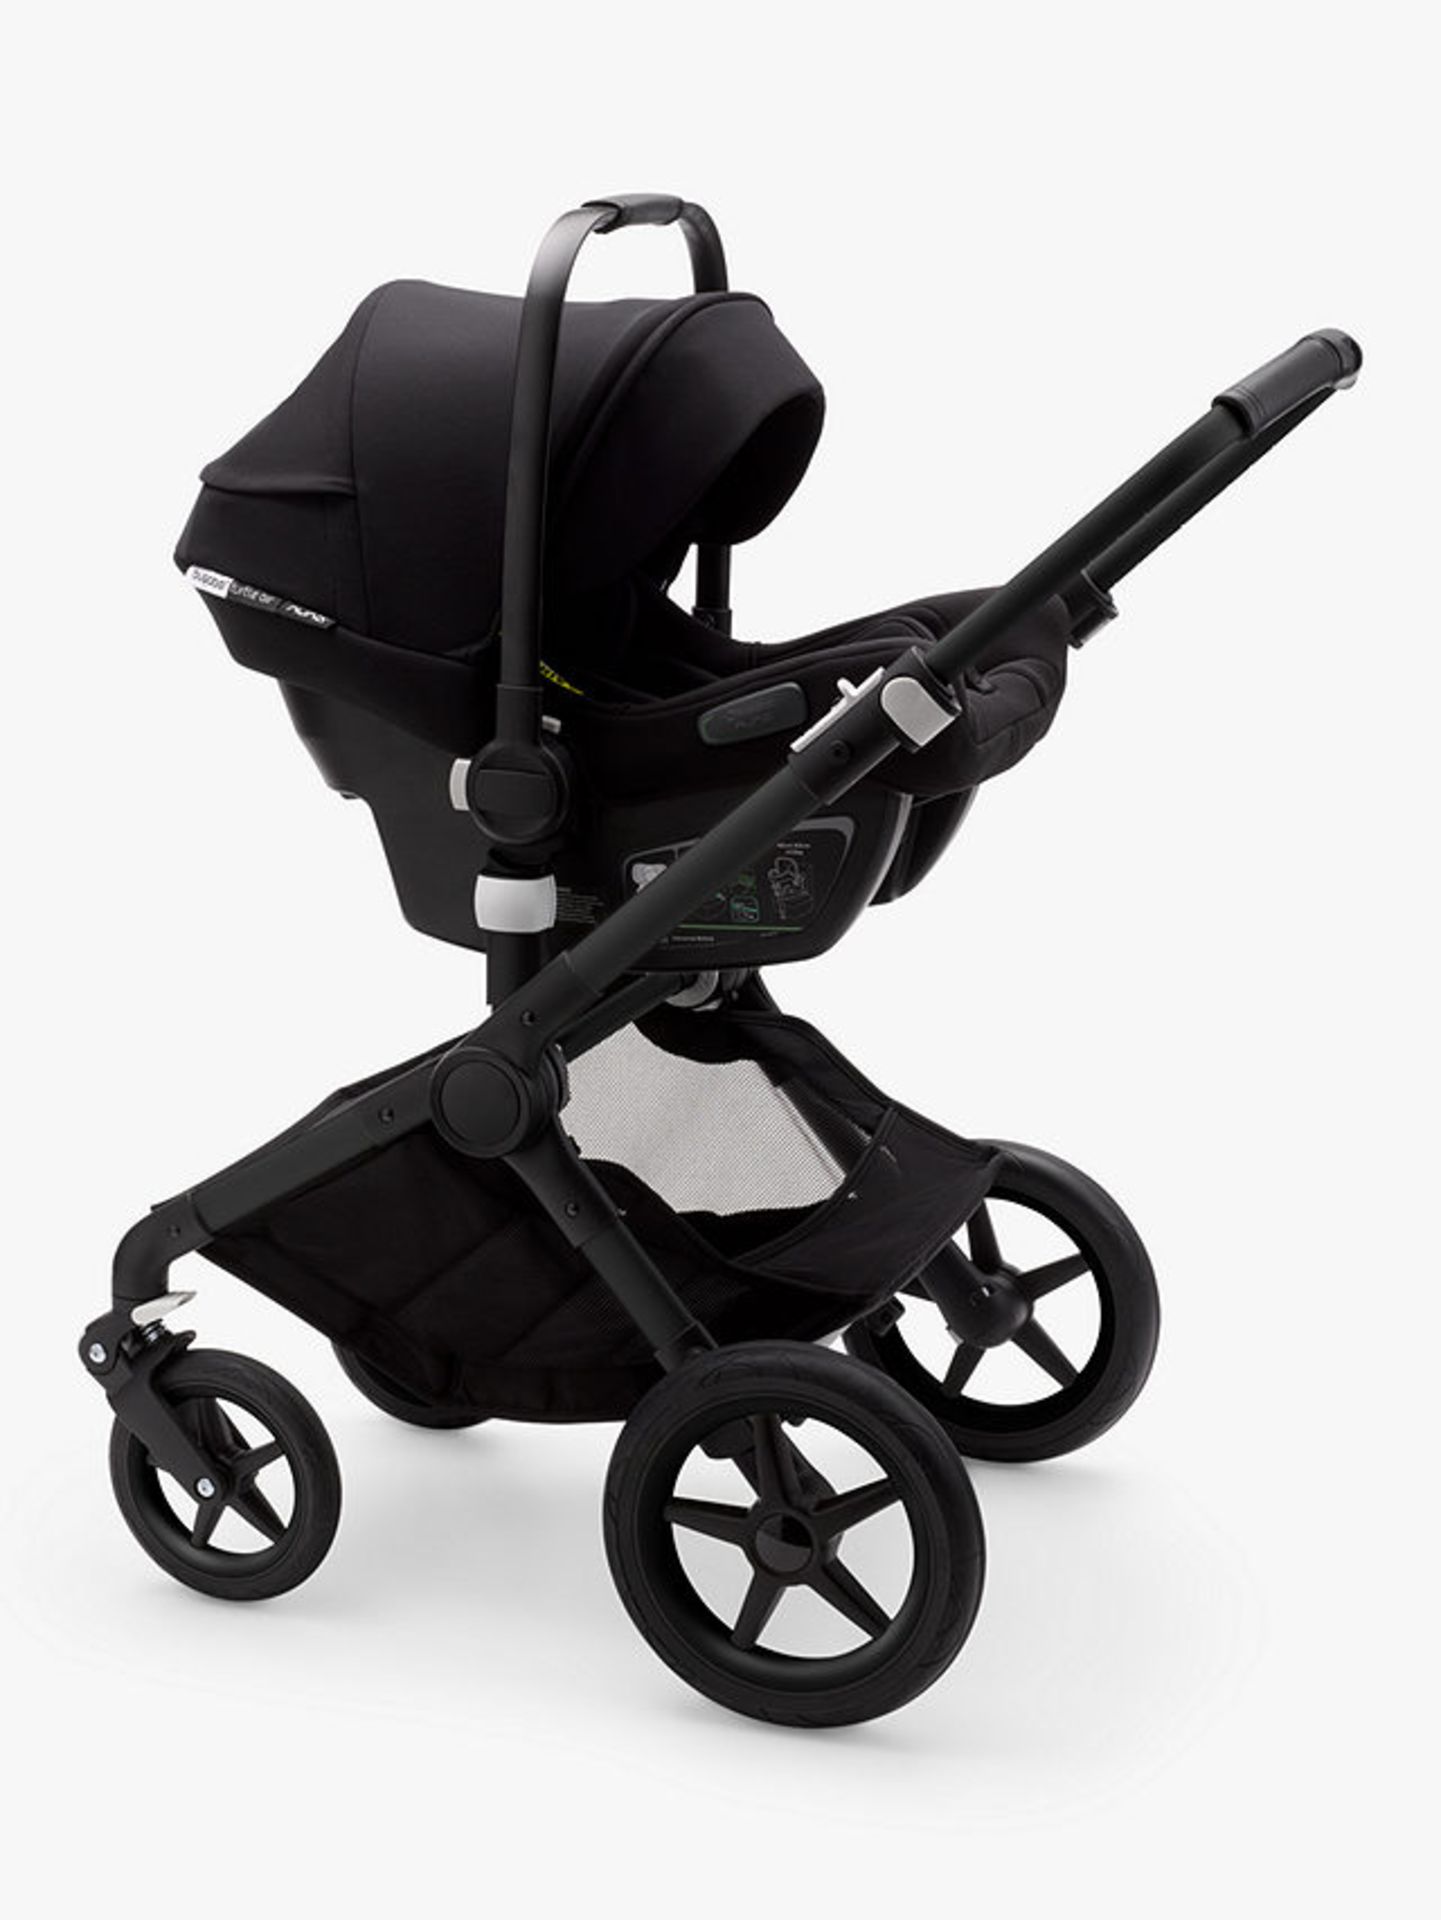 BUGABOO TURTLE AIR BY NUNA CAR SEAT IN BLACK - RRP £209 - Image 7 of 7